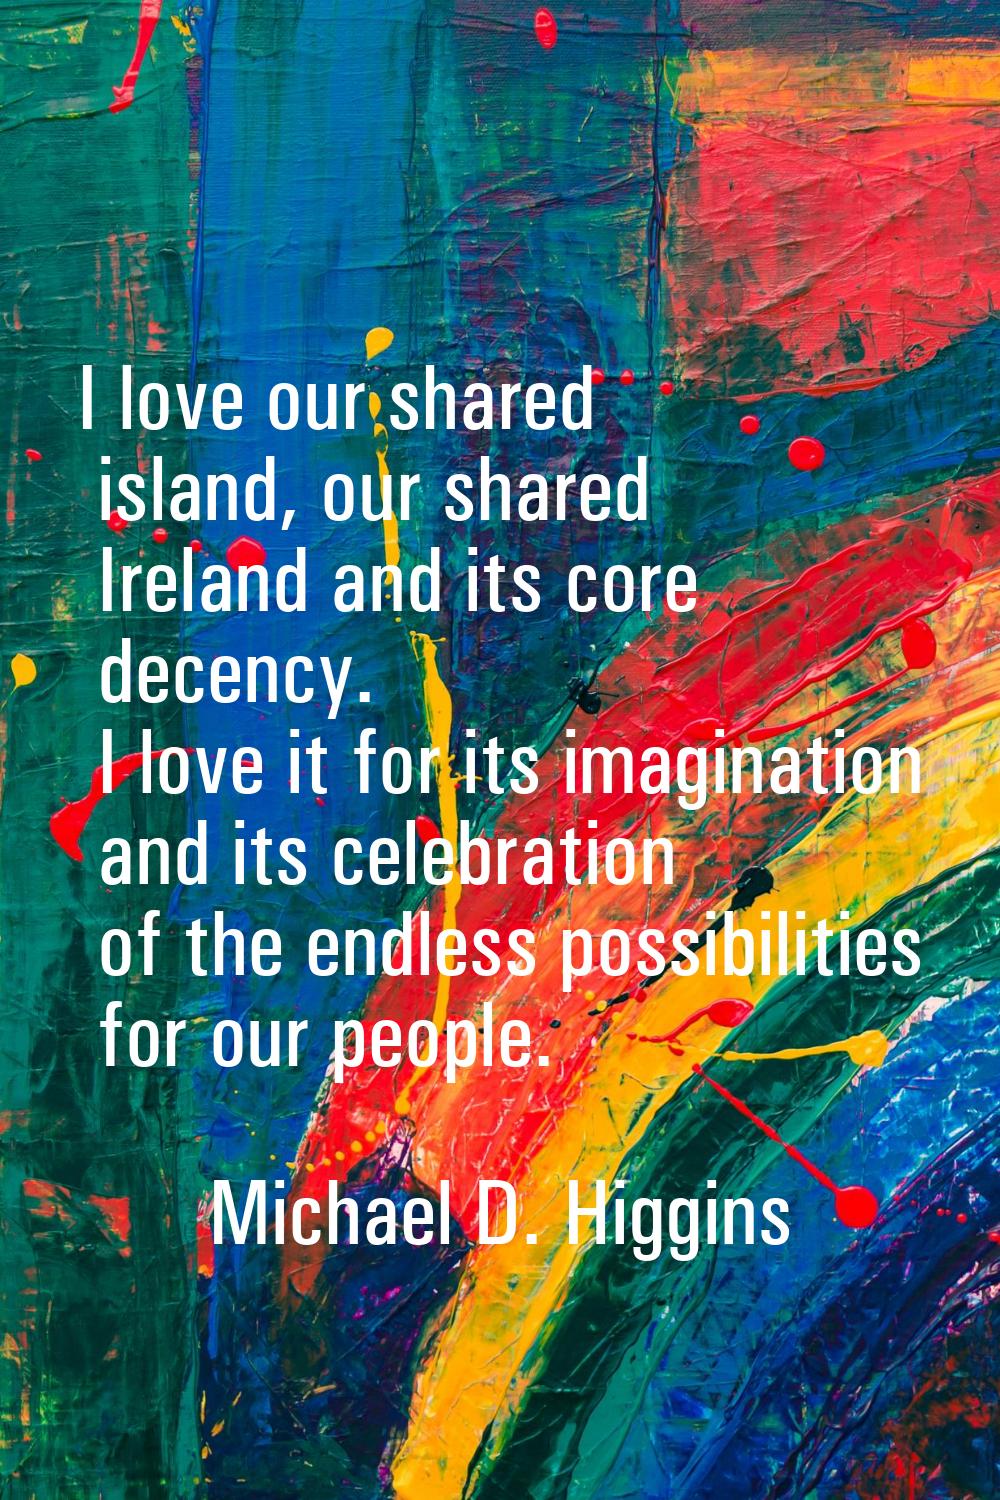 I love our shared island, our shared Ireland and its core decency. I love it for its imagination an